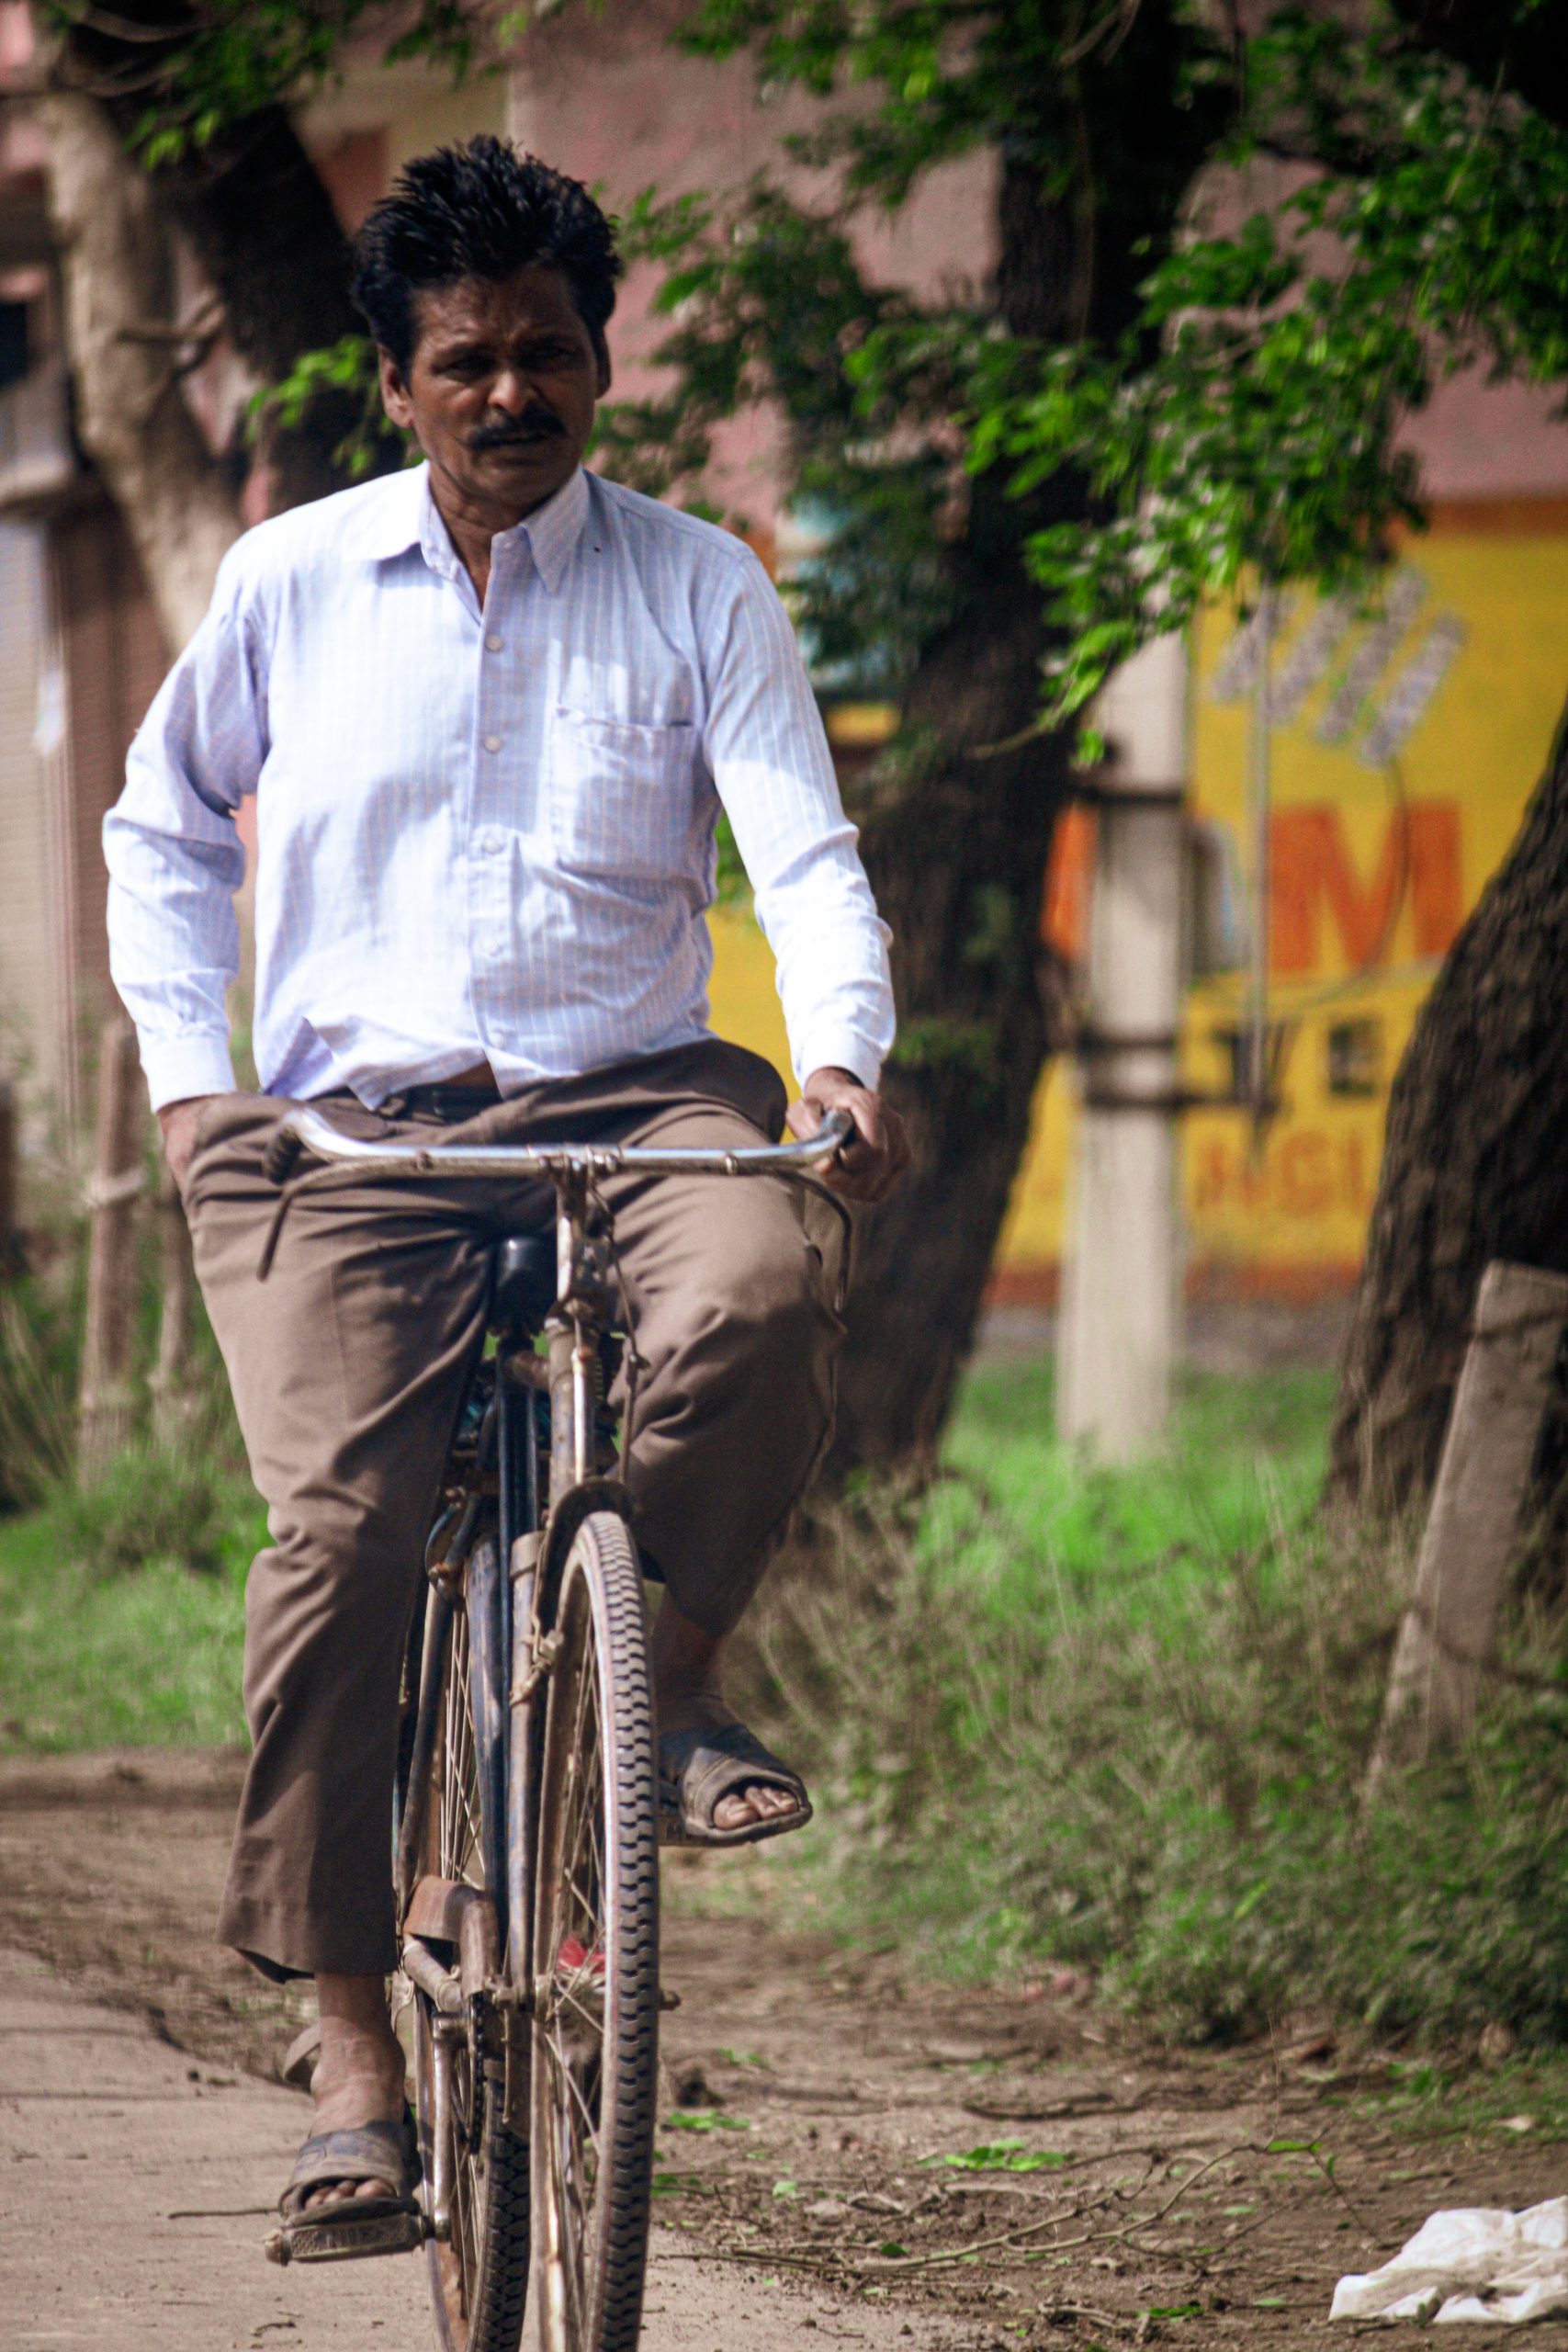 A man cycling in an Indian village